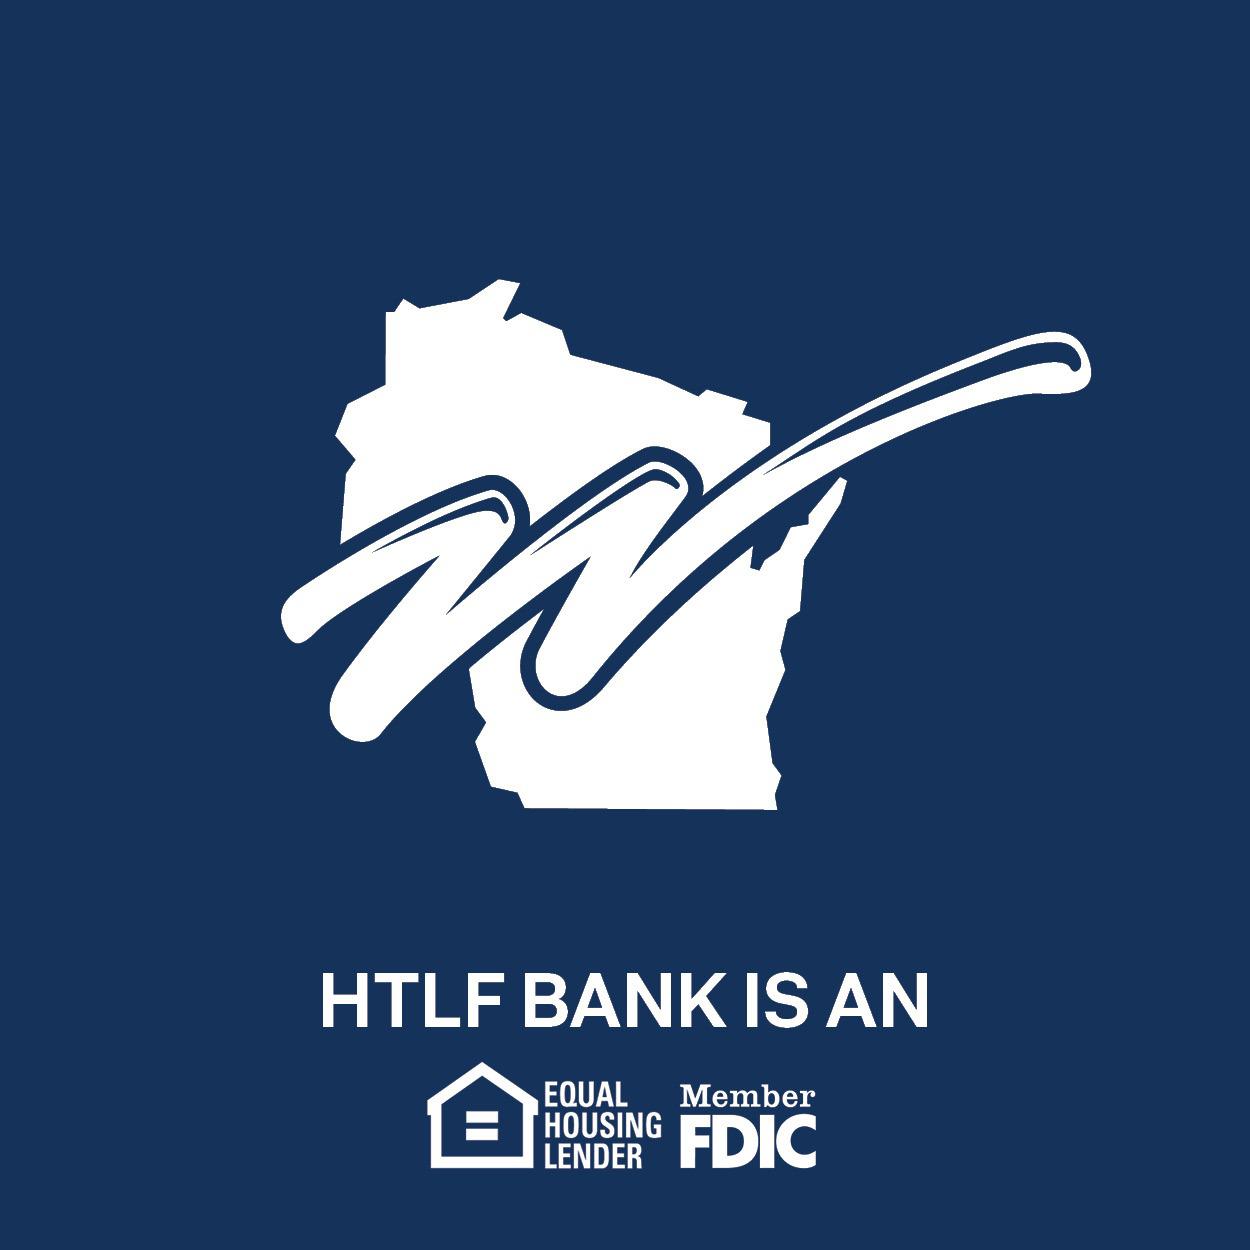 Wisconsin Bank & Trust, a division of HTLF Bank - Sheboygan, WI 53081 - (920)459-5600 | ShowMeLocal.com